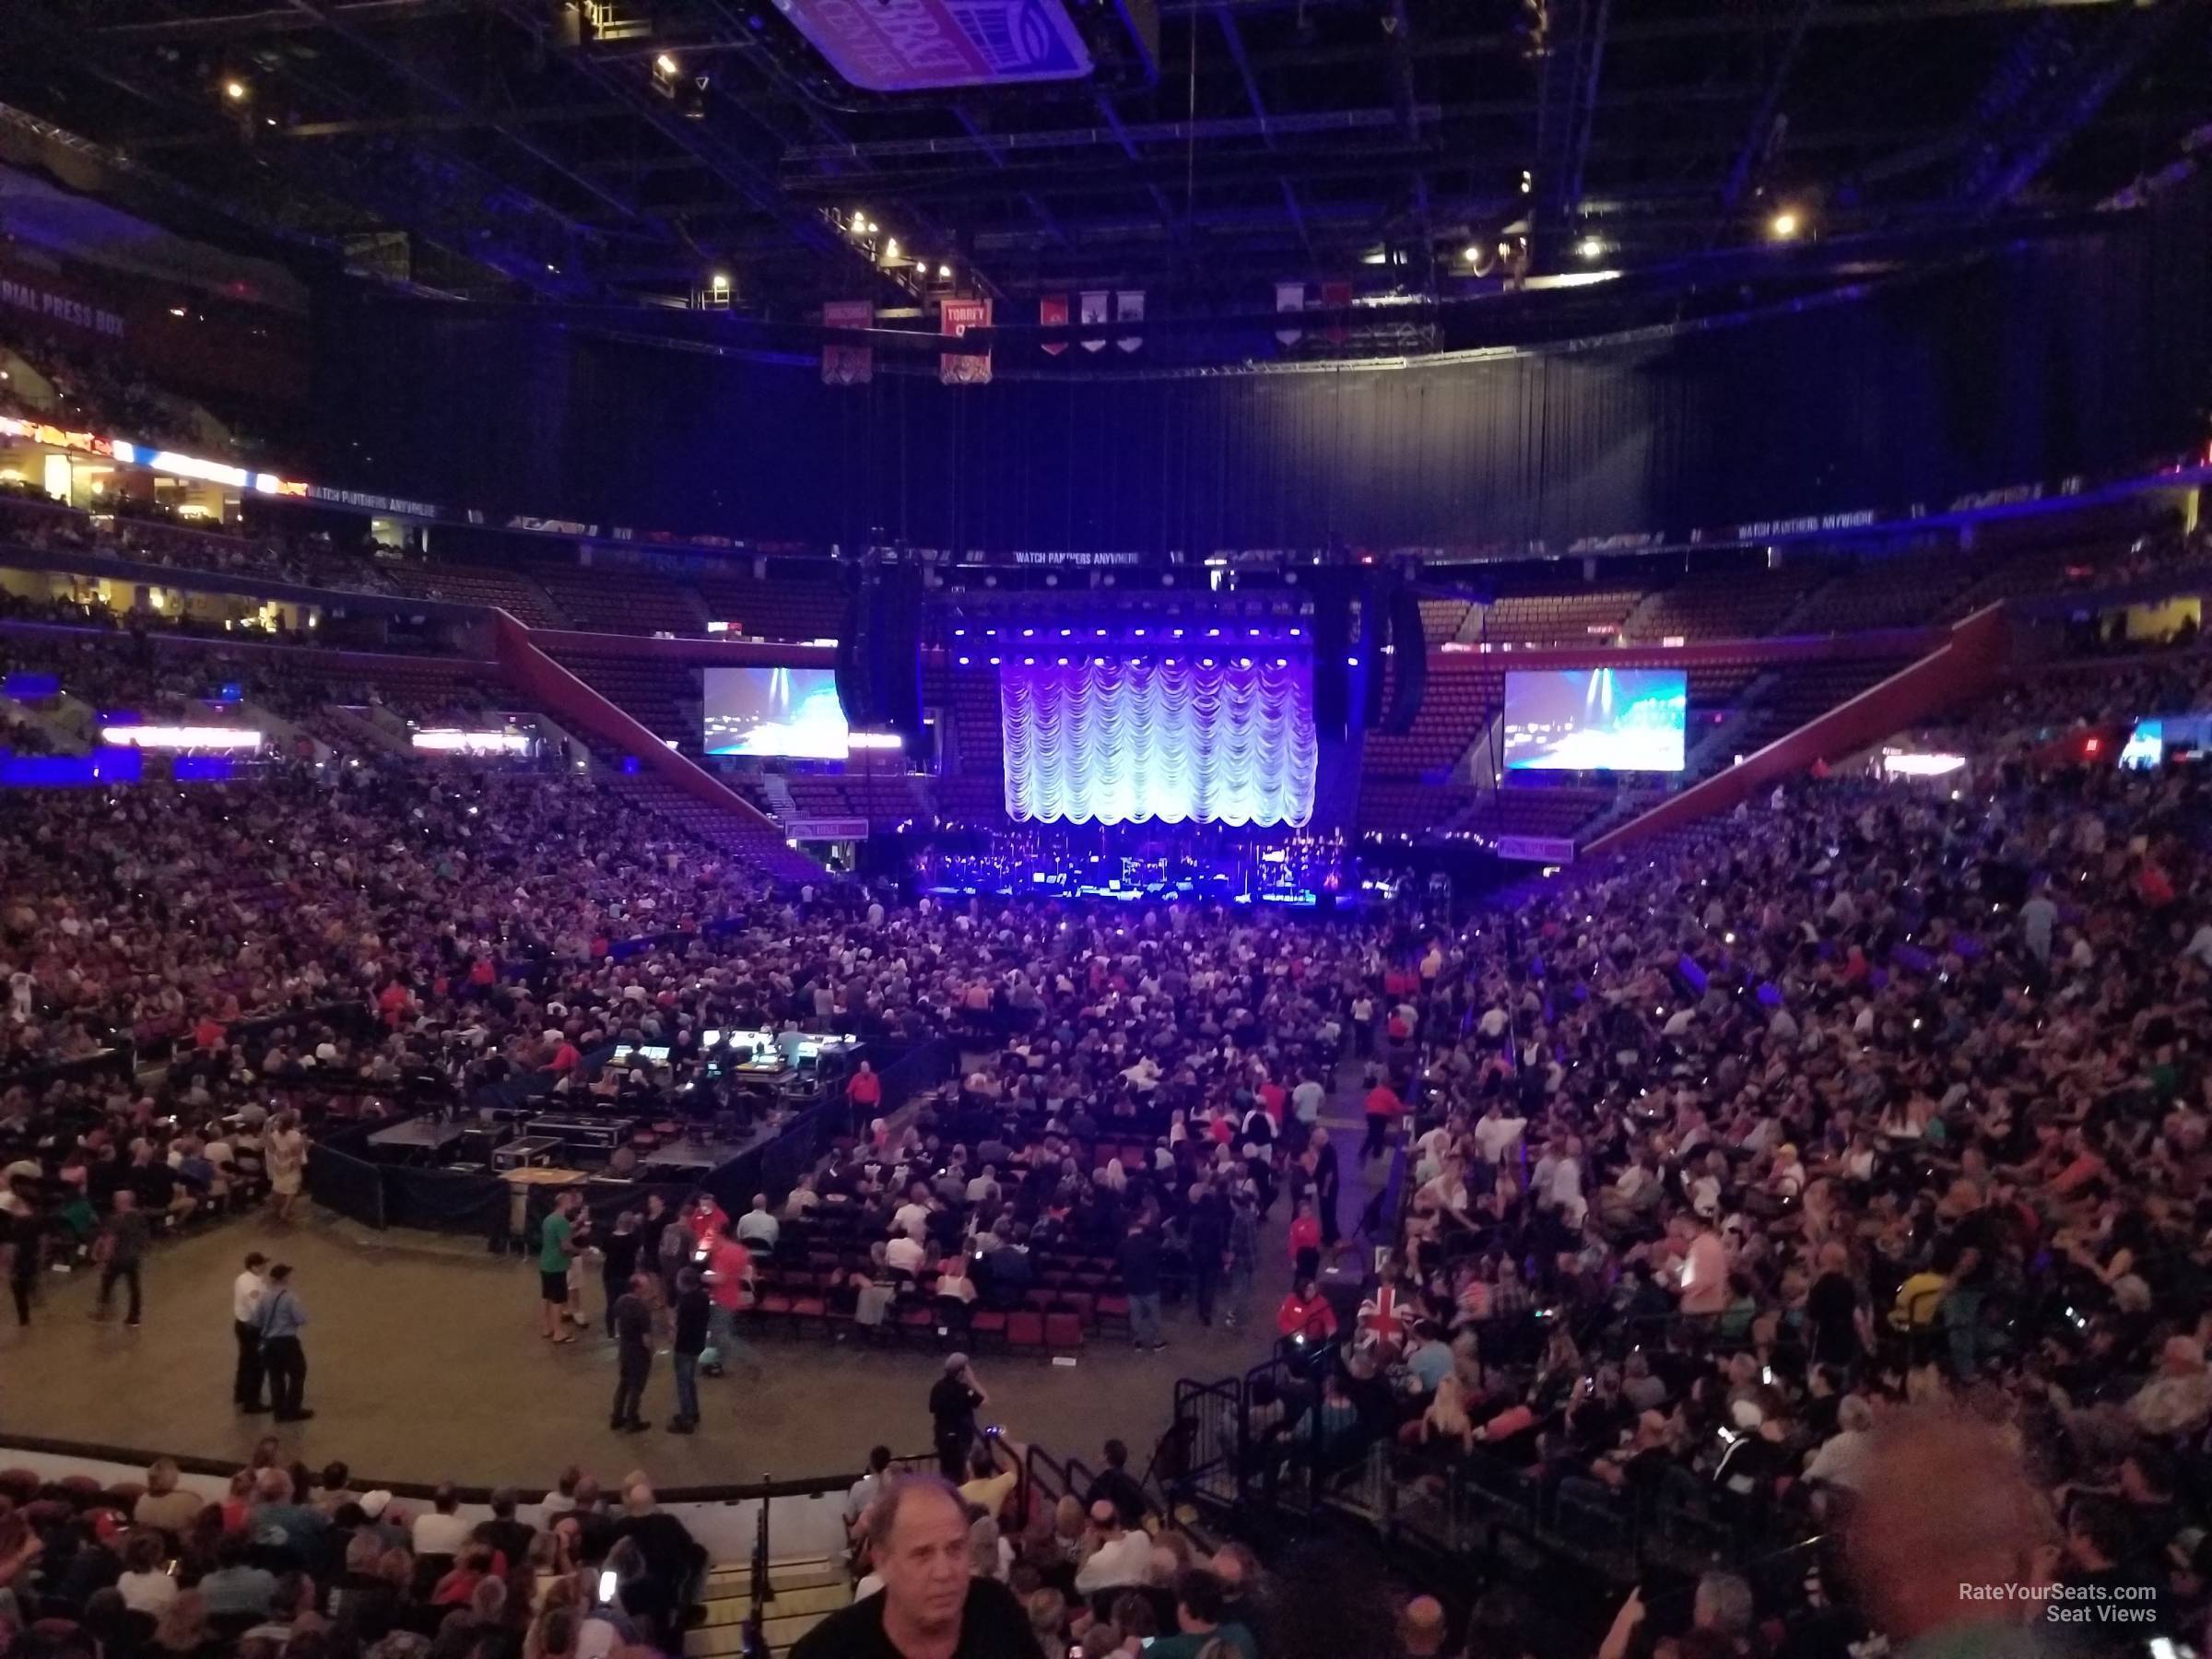 section 108, row 18 seat view  for concert - amerant bank arena